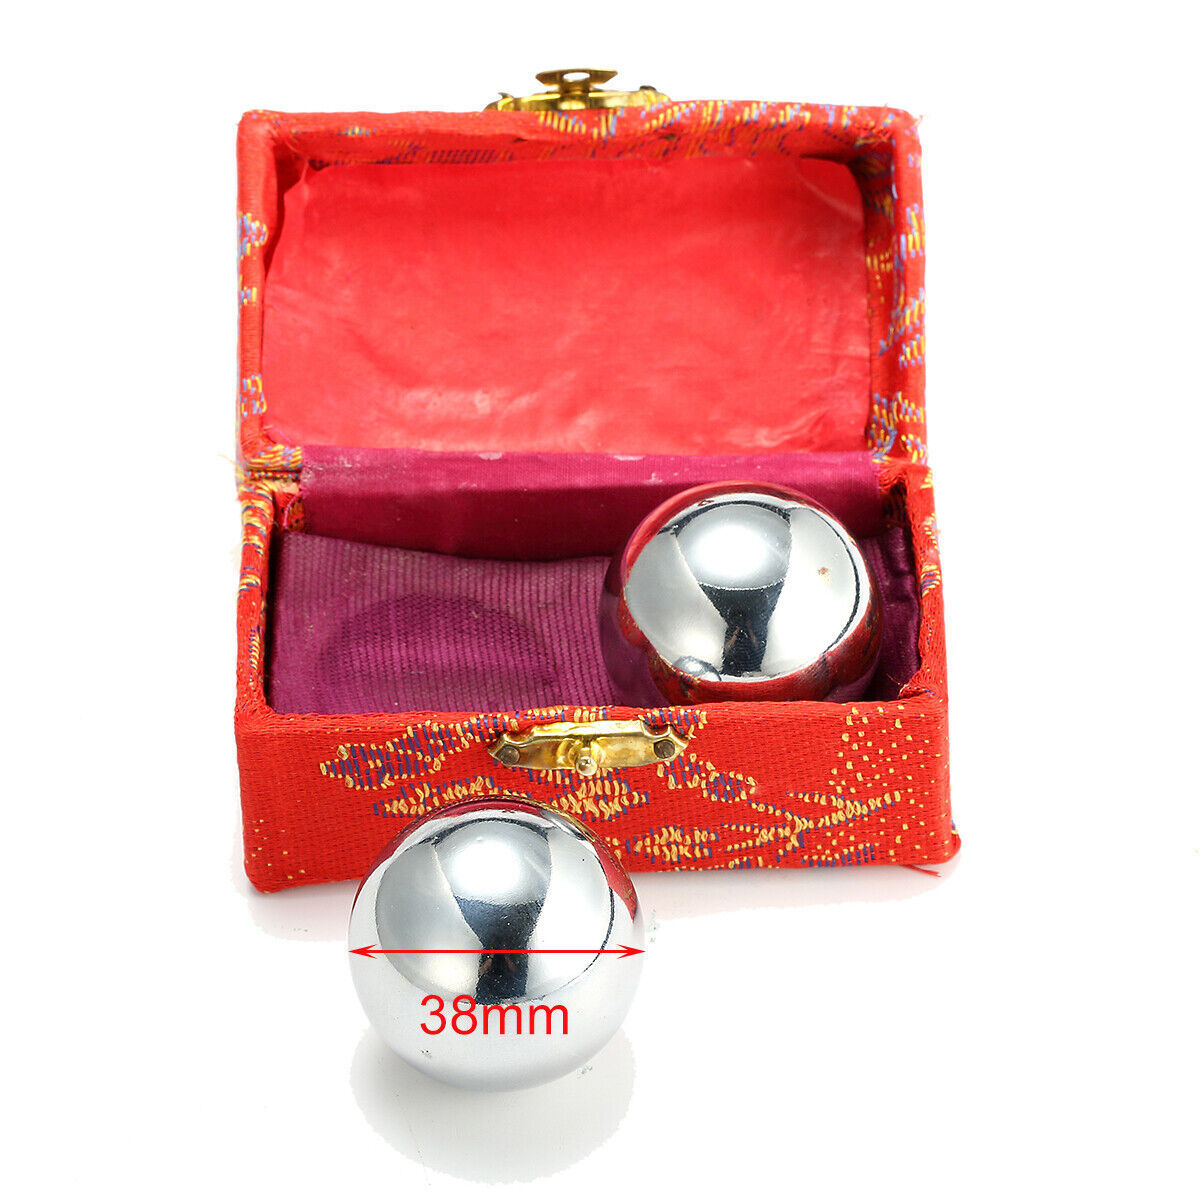 2x Baoding Balls Chrome Chinese Health Exercise Stress Relief Relaxation Therapy